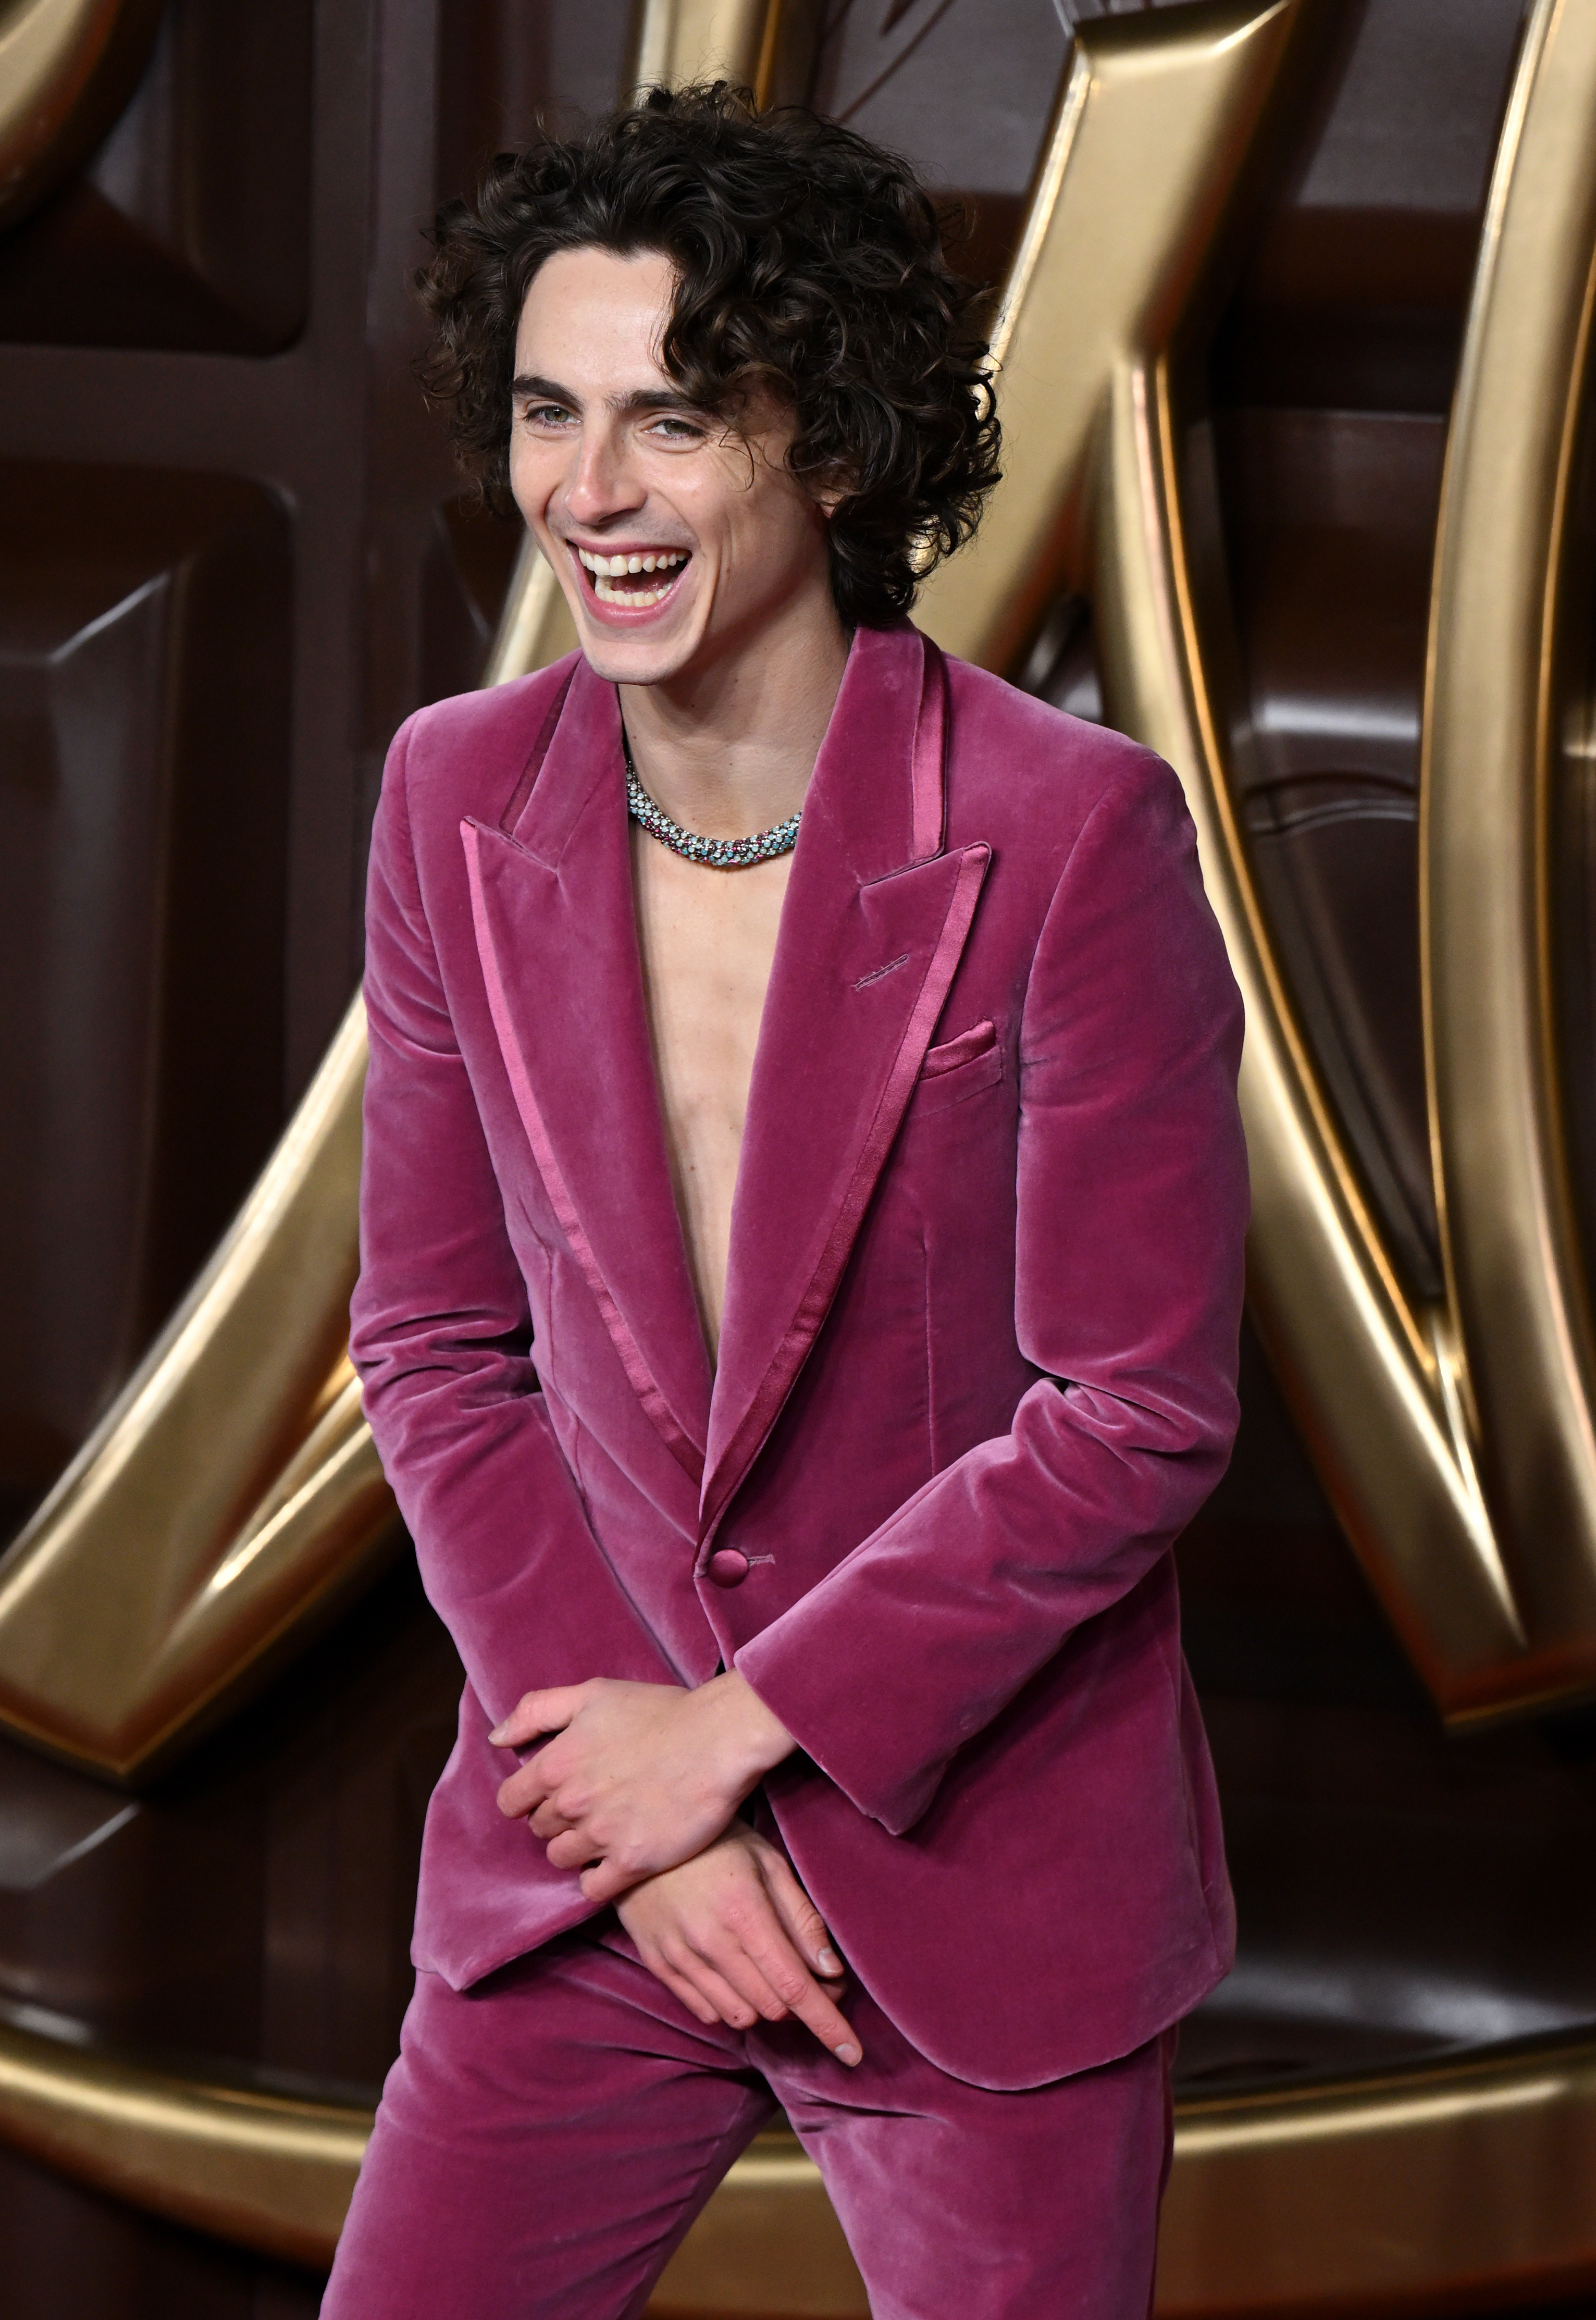 Timothée Chalamet at the Wonka World Premiere laughing in his burgundy suit